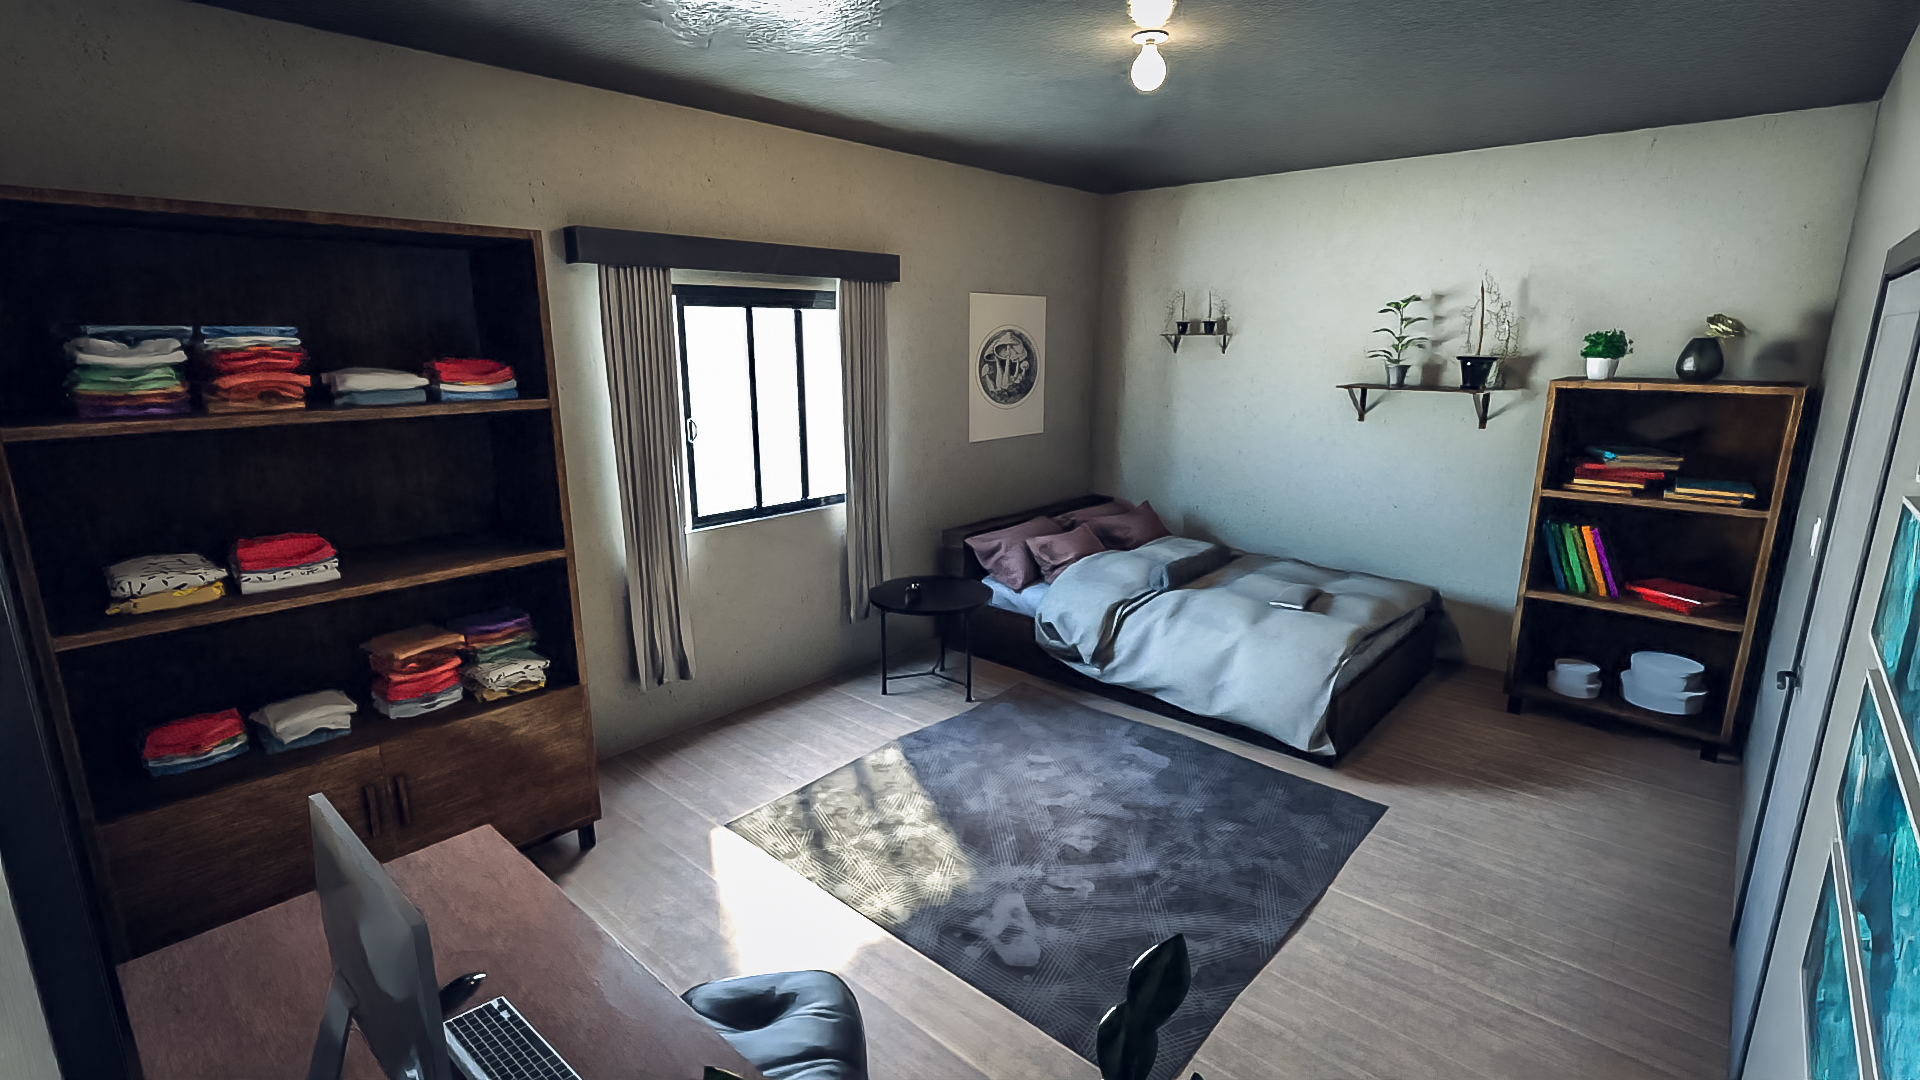 Student Bedroom by: Tesla3dCorp, 3D Models by Daz 3D